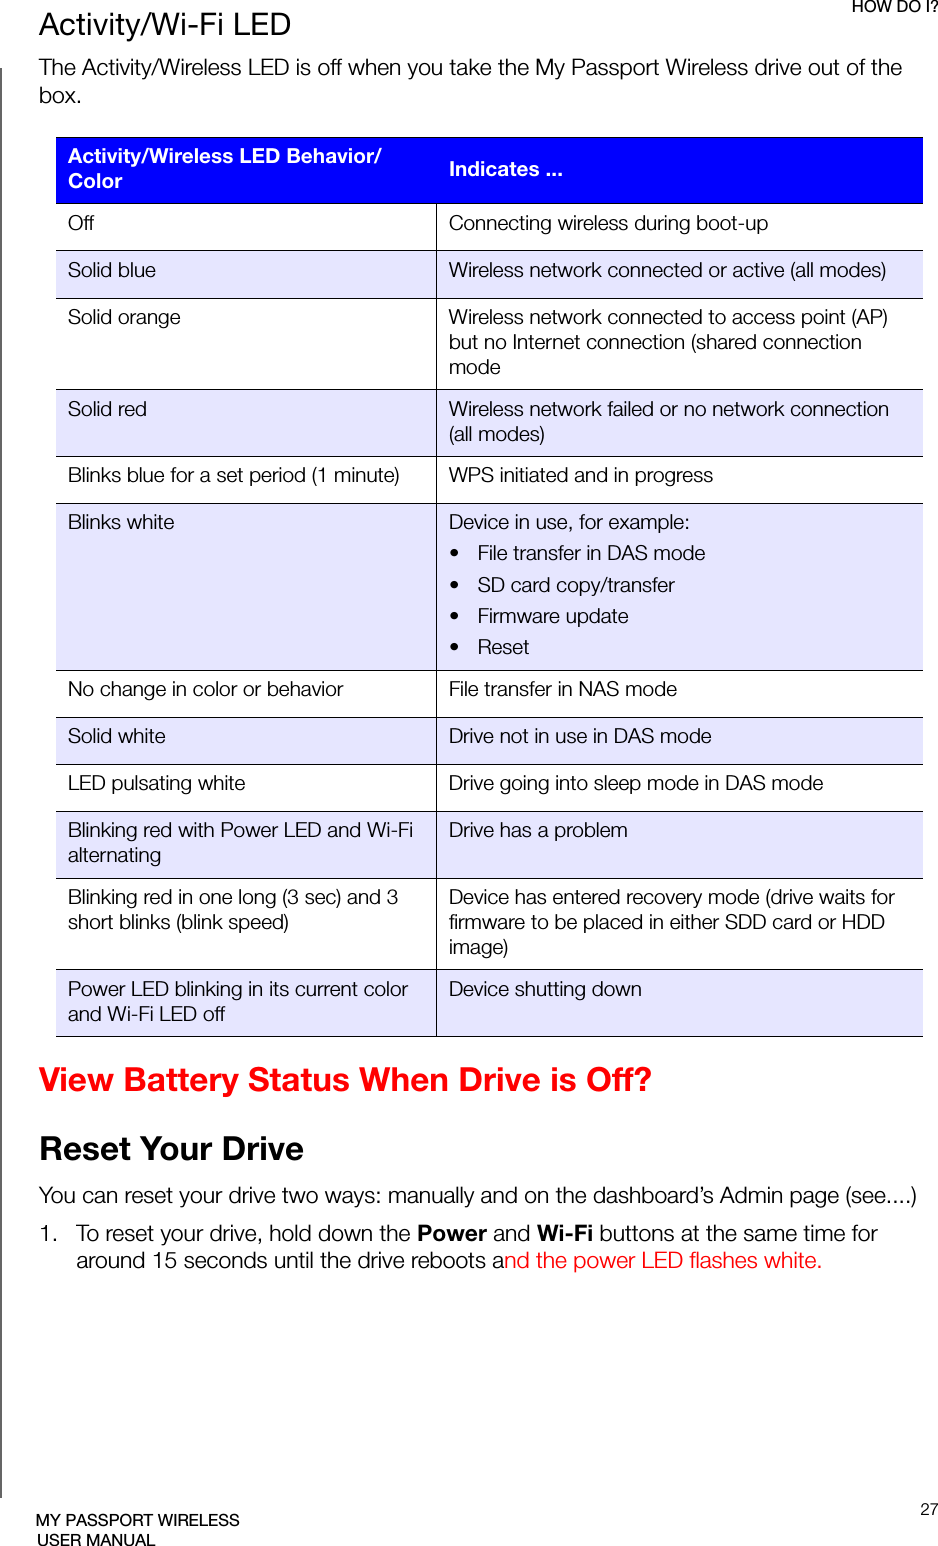 HOW DO I?27MY PASSPORT WIRELESSUSER MANUALActivity/Wi-Fi LEDThe Activity/Wireless LED is off when you take the My Passport Wireless drive out of the box.View Battery Status When Drive is Off?Reset Your DriveYou can reset your drive two ways: manually and on the dashboard’s Admin page (see....)1.   To reset your drive, hold down the Power and Wi-Fi buttons at the same time for around 15 seconds until the drive reboots and the power LED flashes white.Activity/Wireless LED Behavior/Color Indicates ...Off Connecting wireless during boot-upSolid blue Wireless network connected or active (all modes)Solid orange Wireless network connected to access point (AP) but no Internet connection (shared connection modeSolid red  Wireless network failed or no network connection (all modes)Blinks blue for a set period (1 minute) WPS initiated and in progressBlinks white Device in use, for example:• File transfer in DAS mode• SD card copy/transfer• Firmware update•ResetNo change in color or behavior File transfer in NAS modeSolid white Drive not in use in DAS mode LED pulsating white Drive going into sleep mode in DAS mode Blinking red with Power LED and Wi-Fi alternatingDrive has a problemBlinking red in one long (3 sec) and 3 short blinks (blink speed)Device has entered recovery mode (drive waits for firmware to be placed in either SDD card or HDD image)Power LED blinking in its current color and Wi-Fi LED offDevice shutting down